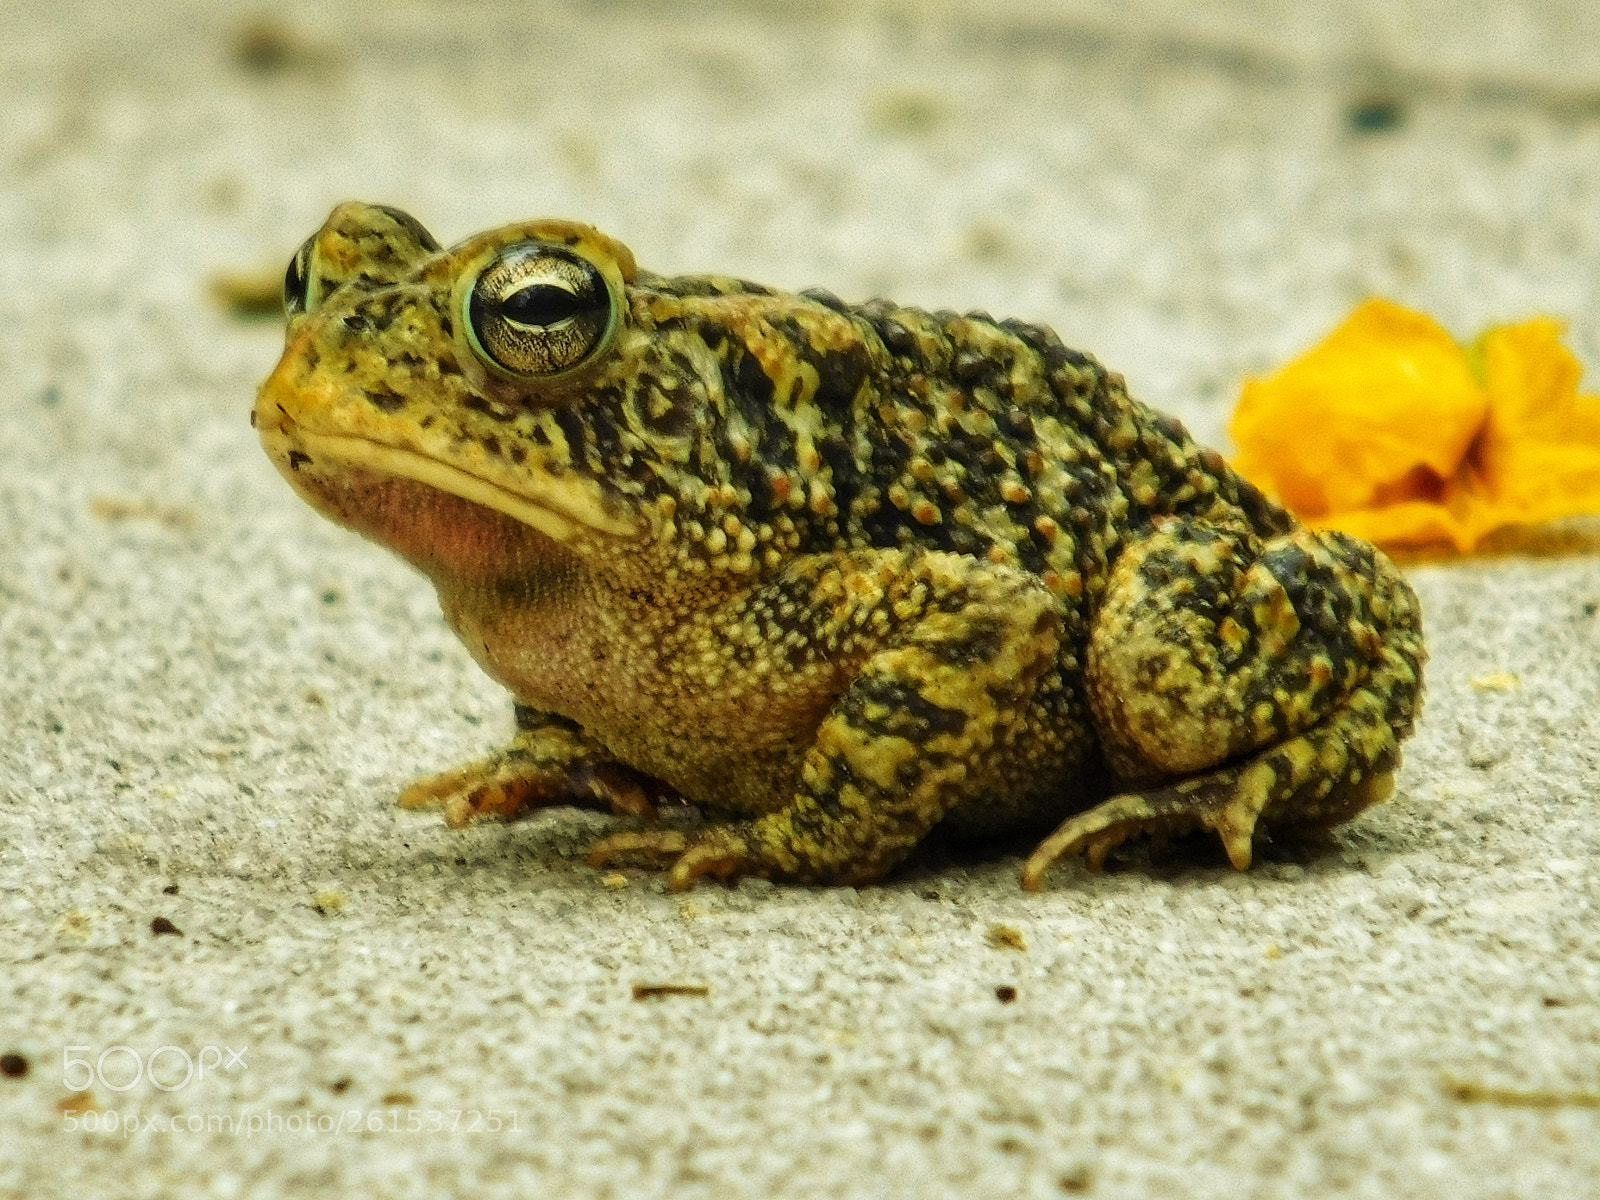 Nikon Coolpix L840 sample photo. That's mr. toad to photography